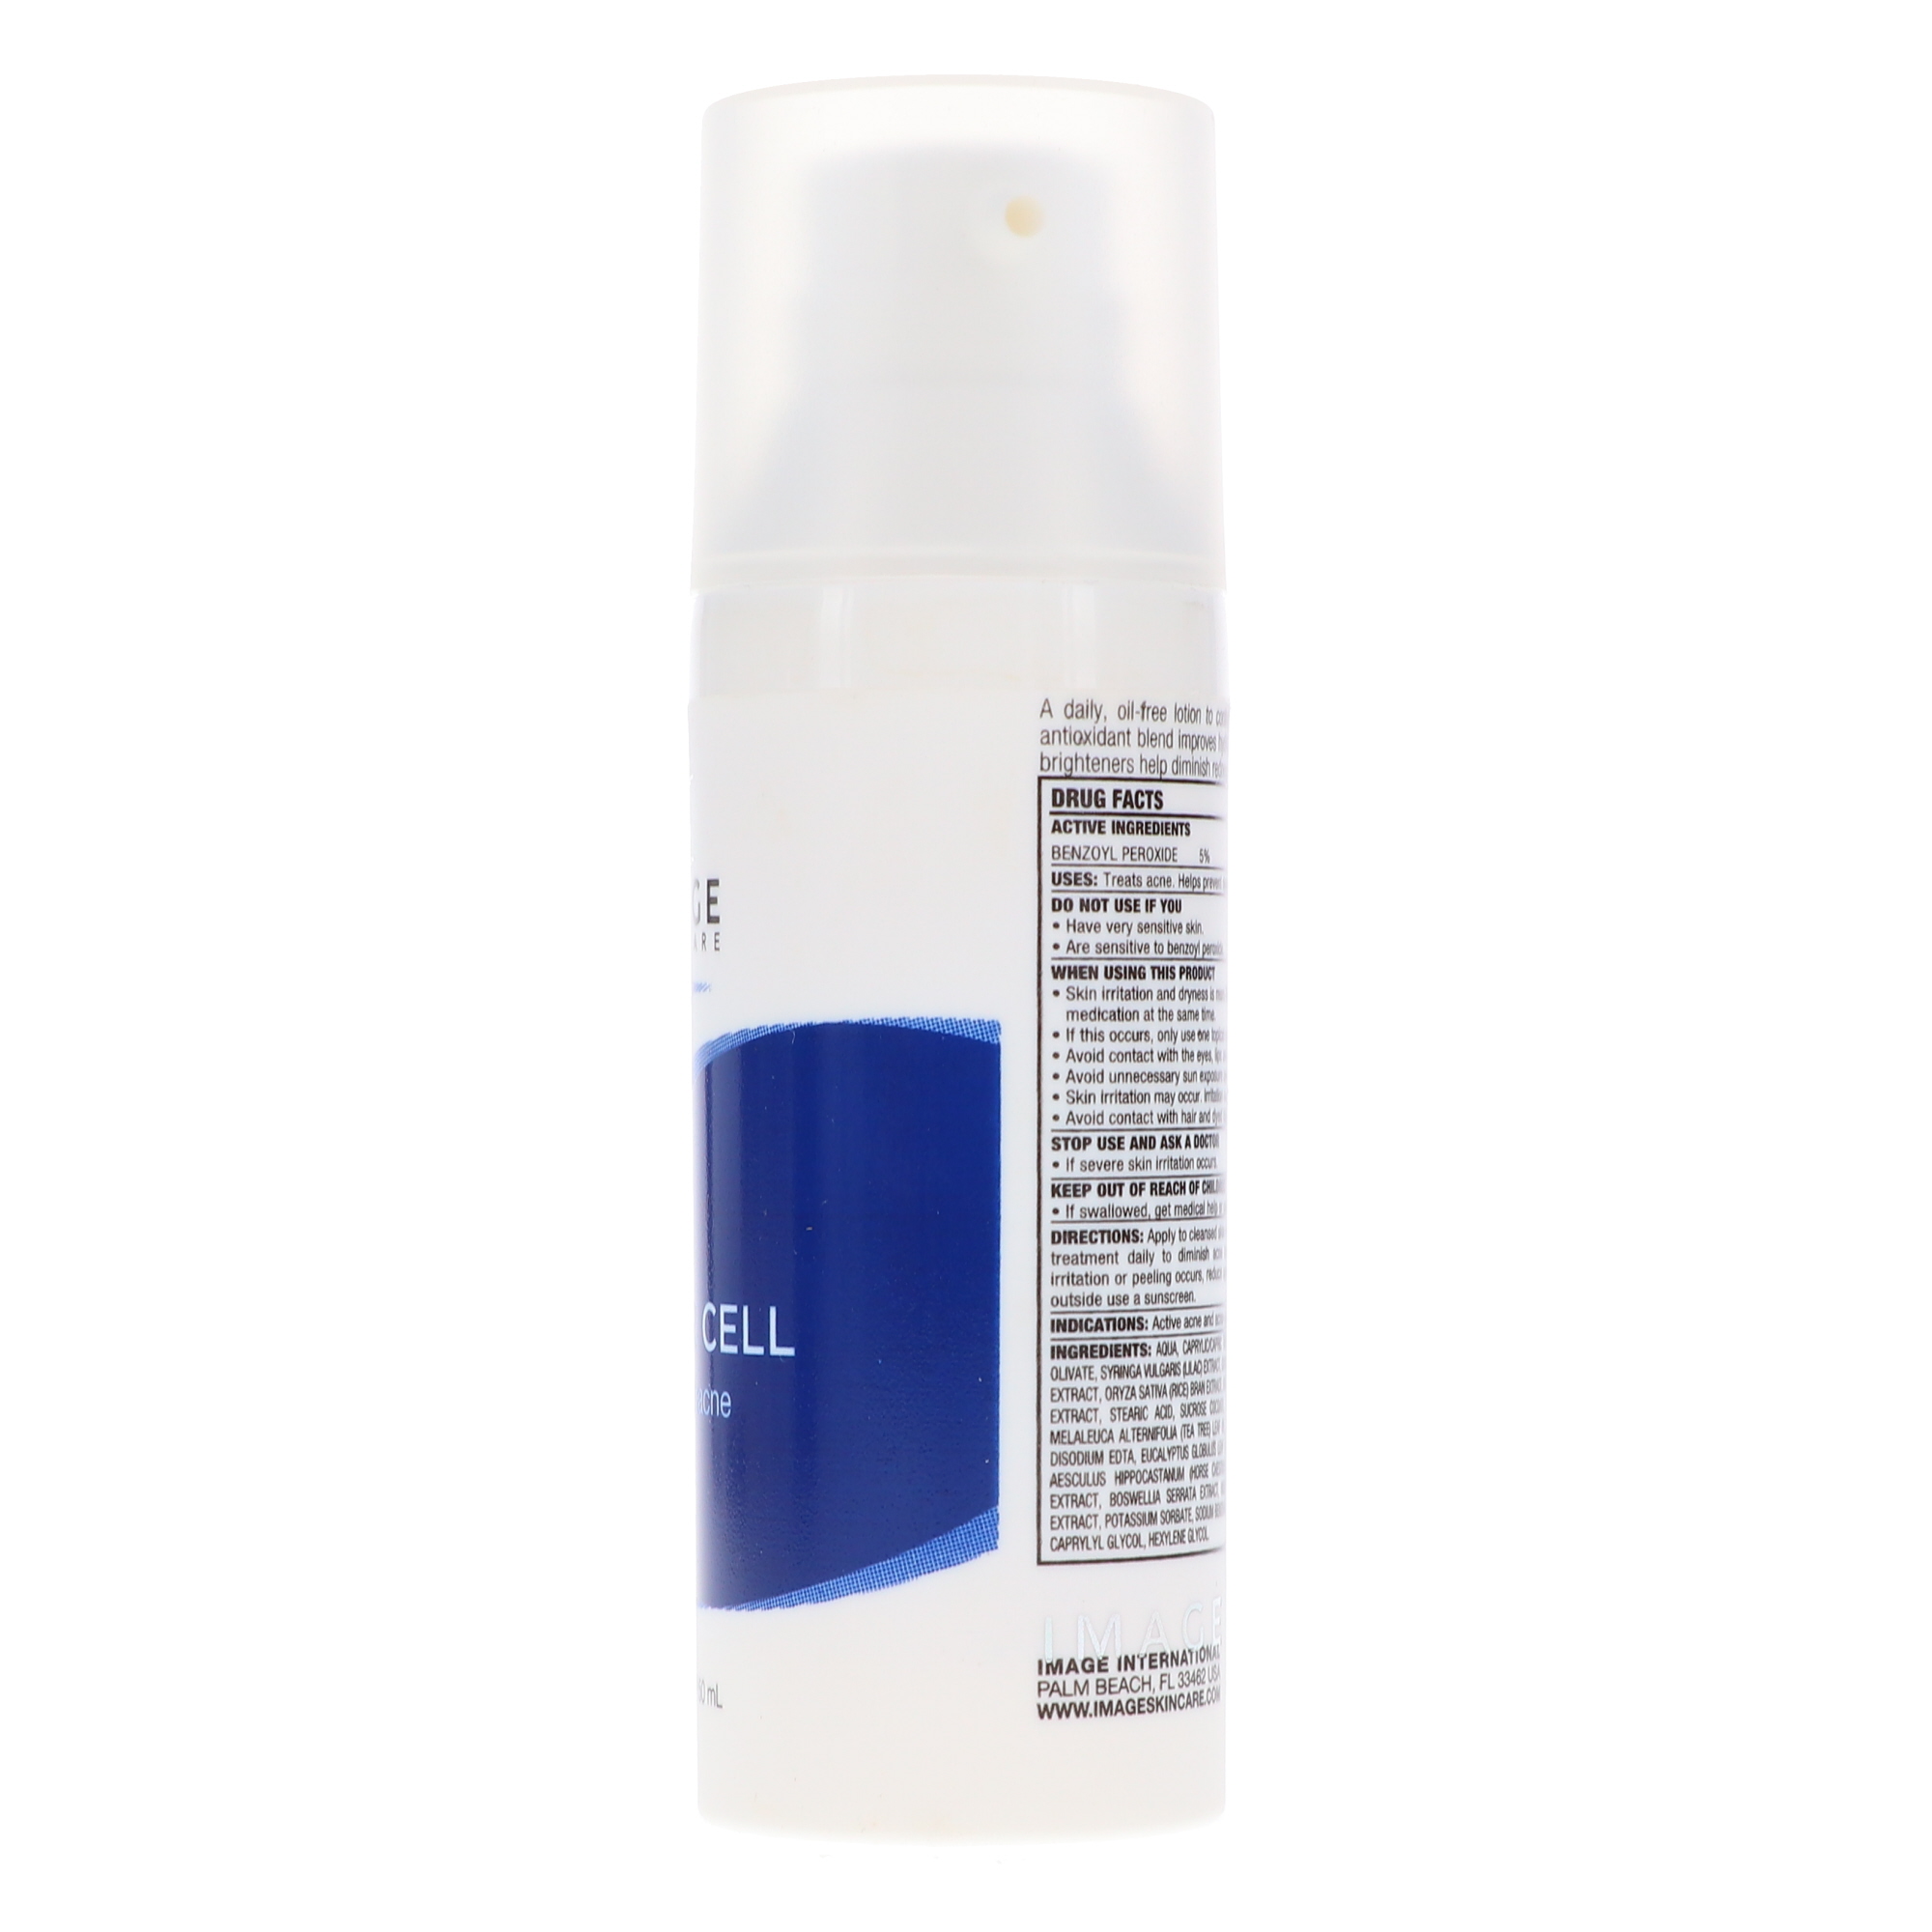 Image Clear Cell Acne Lotion, 1.7 Oz - image 3 of 8